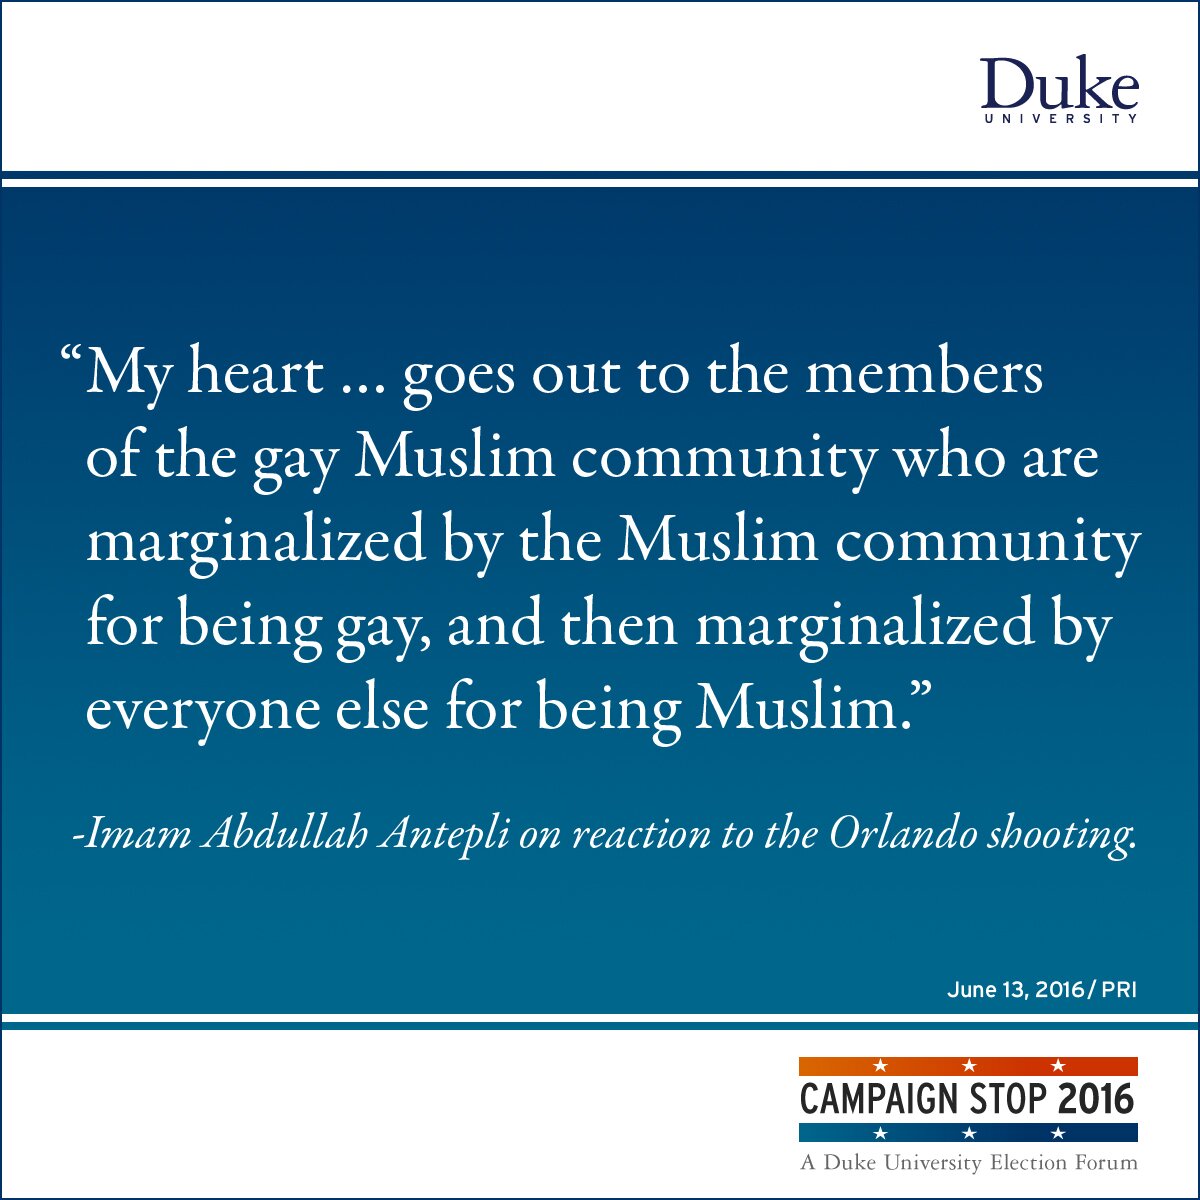 “My heart … goes out to the members of the gay Muslim community who are marginalized by the Muslim community for being gay, and then marginalized by everyone else for being Muslim.” -Imam Abdullah Antepli on reaction to the Orlando shooting.